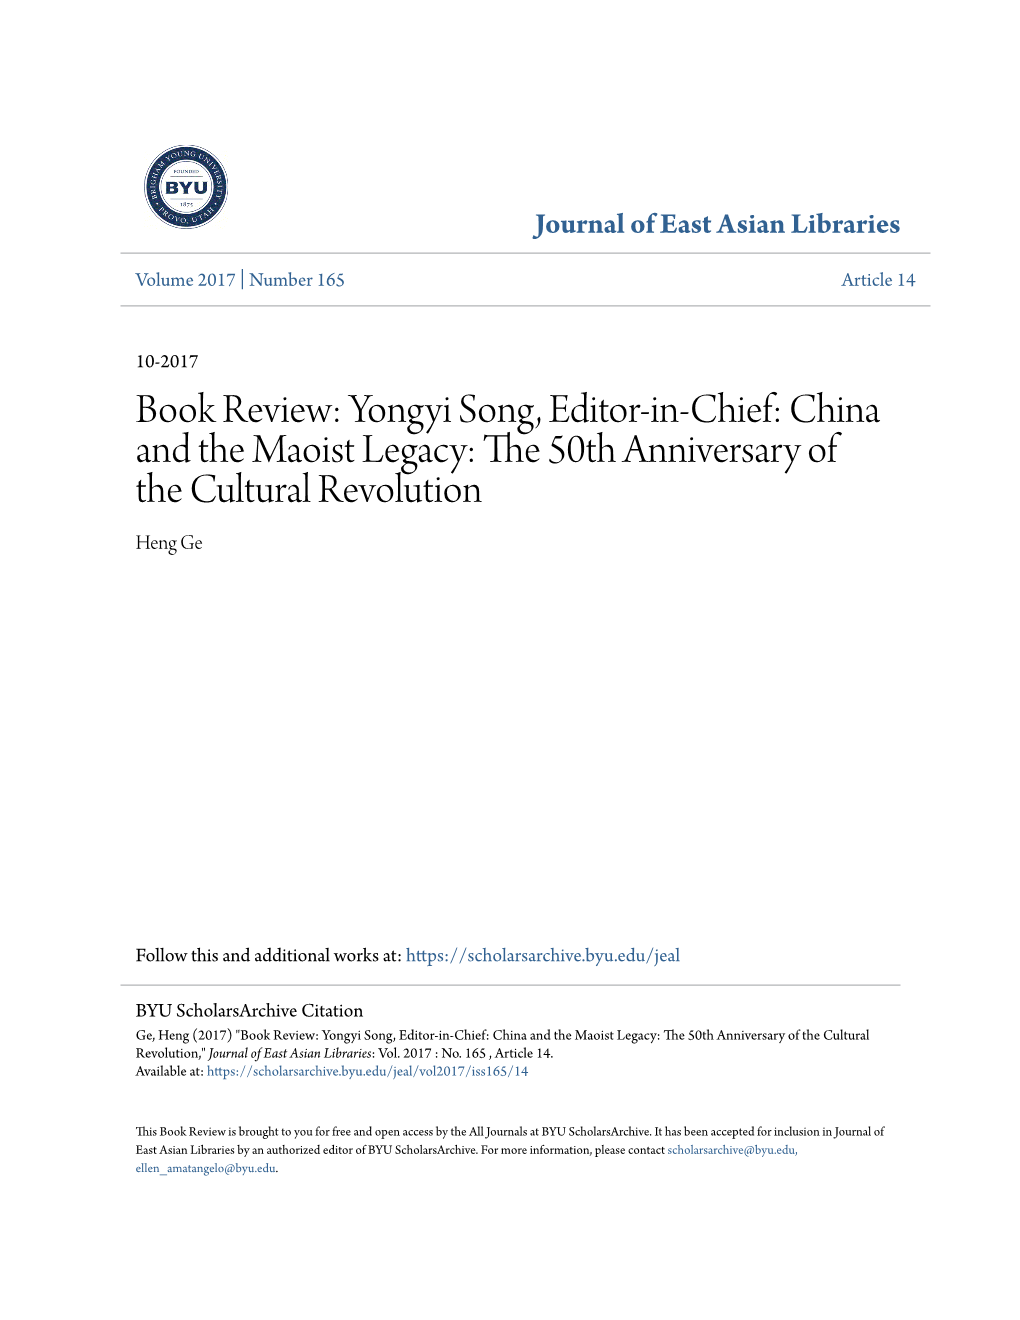 Yongyi Song, Editor-In-Chief: China and the Maoist Legacy: the 50Th Anniversary of the Cultural Revolution Heng Ge